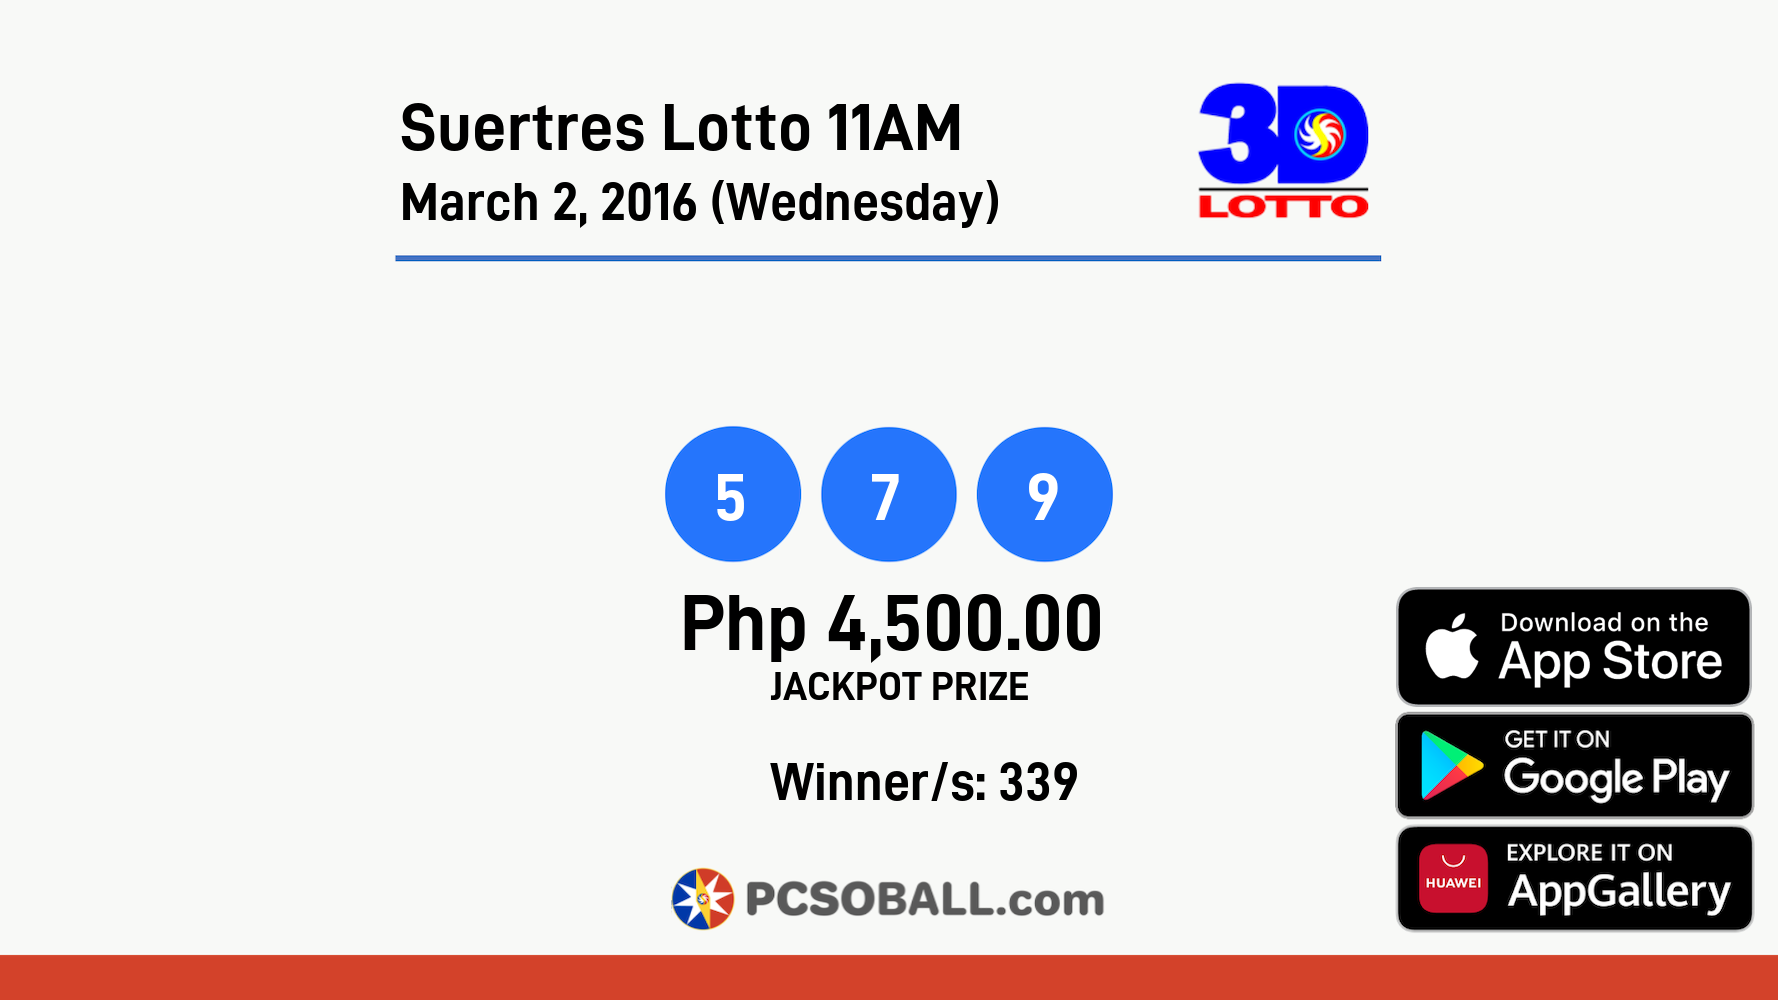 Suertres Lotto 11AM March 2, 2016 (Wednesday) Result